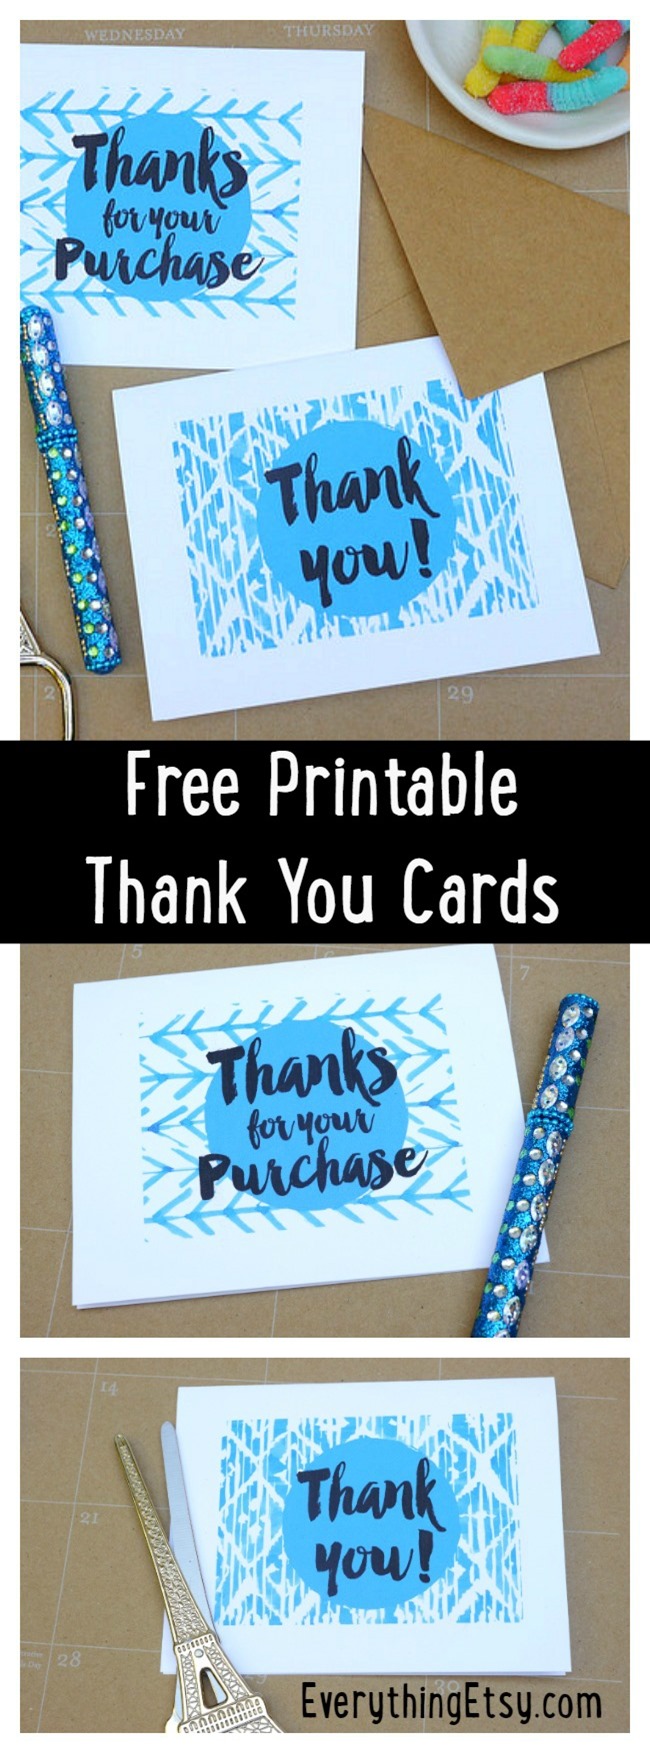 Free Printable Thank You Cards for your Etsy Business - EverythingEtsy.com